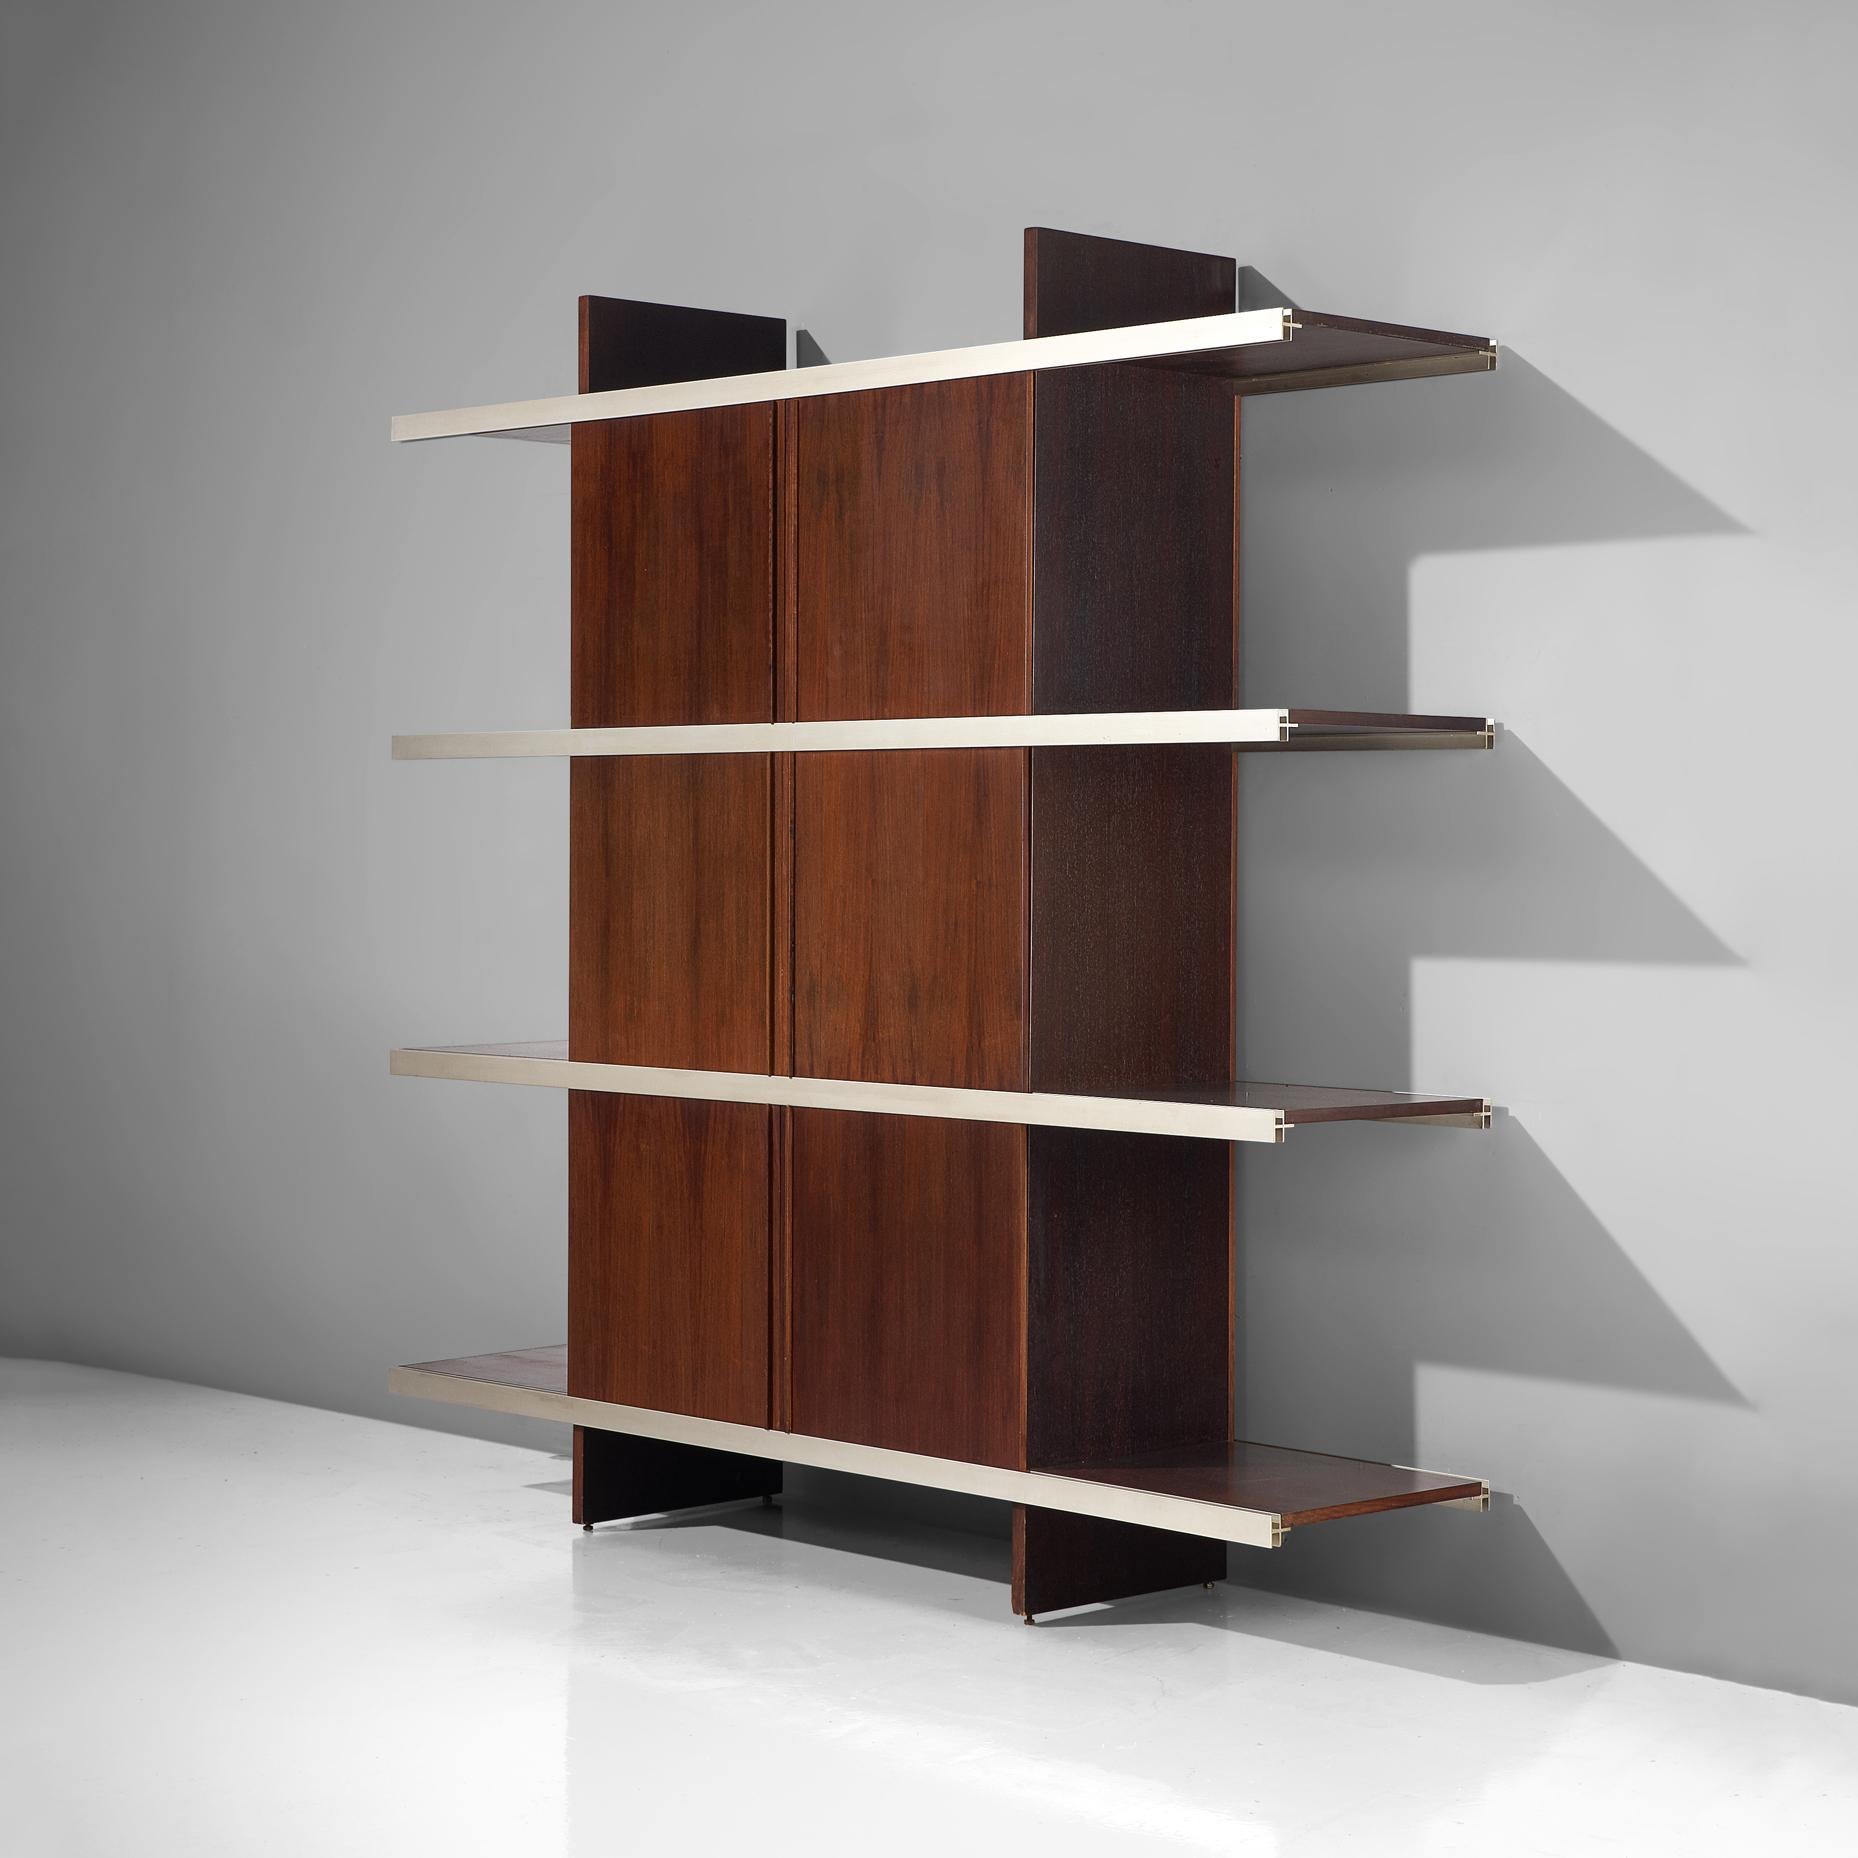 Angelo Mangiarotti for Poltronova, cabinet/bookcase from the multiuse series, exotic wood, aluminum, Italy, 1960s.

Beautiful bookcase/sideboard of the multiuse series that Mangiarotti designed for Poltronova. Multiuse series stands for versatile